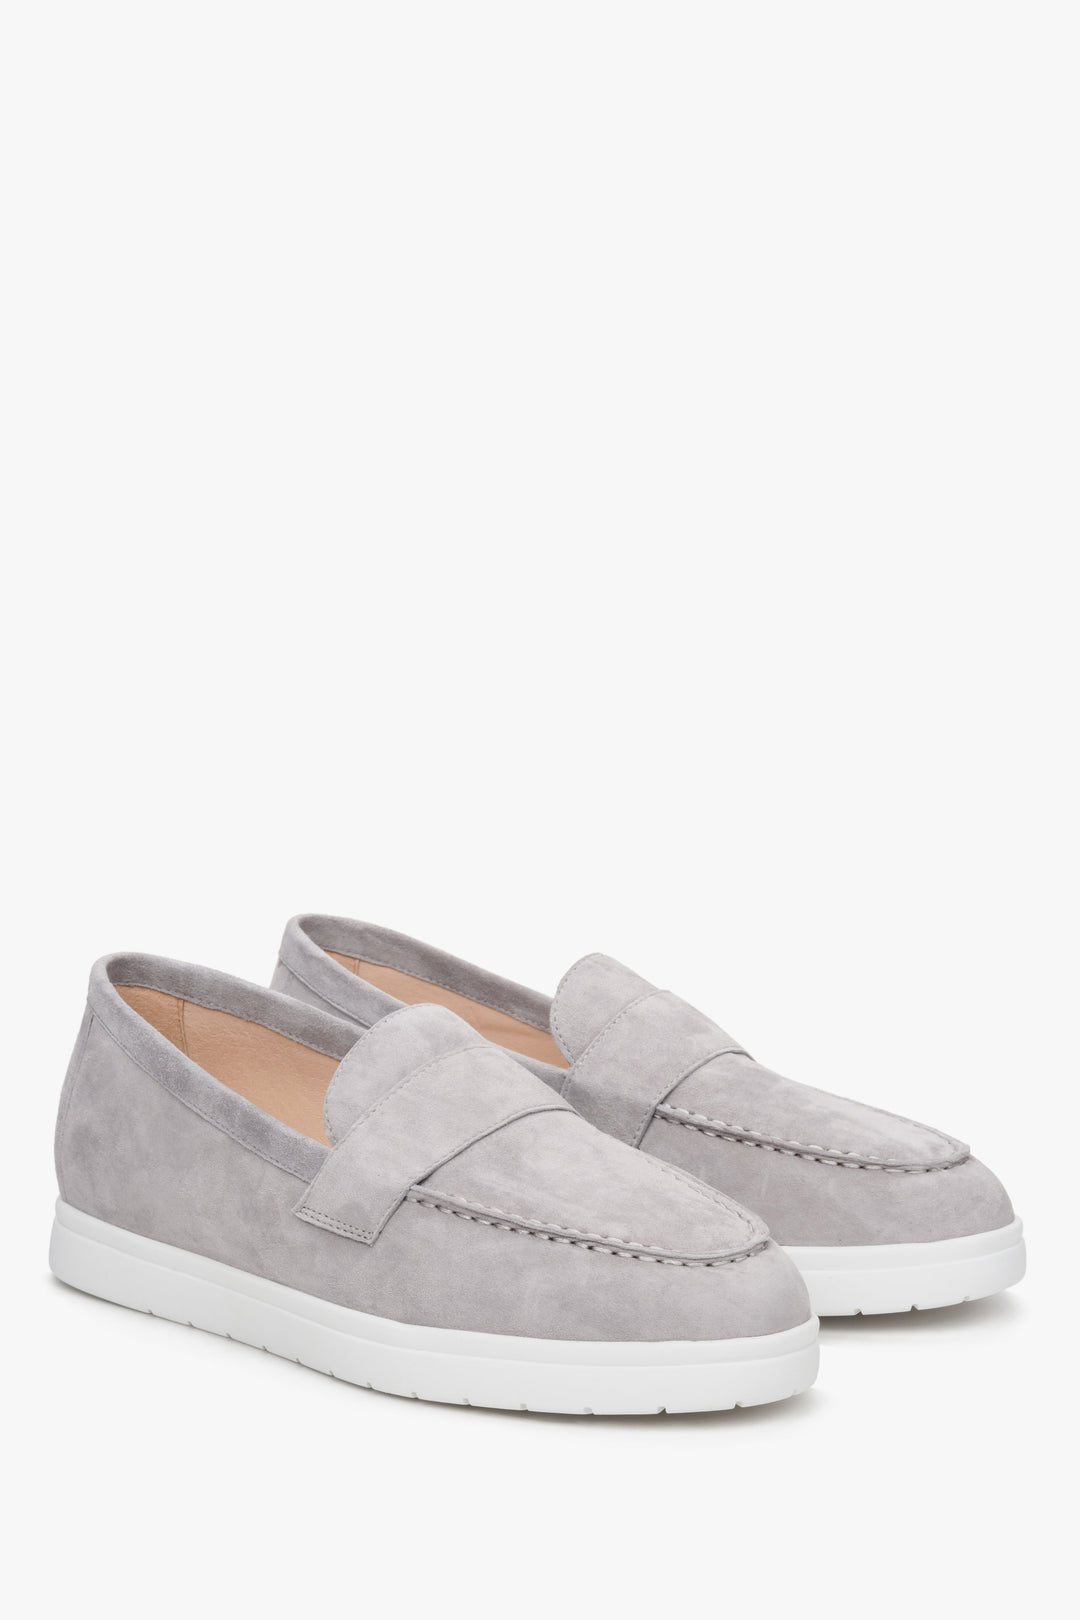 Women's grey moccasins made of genuine velour - presentation of the toe and side vamp.